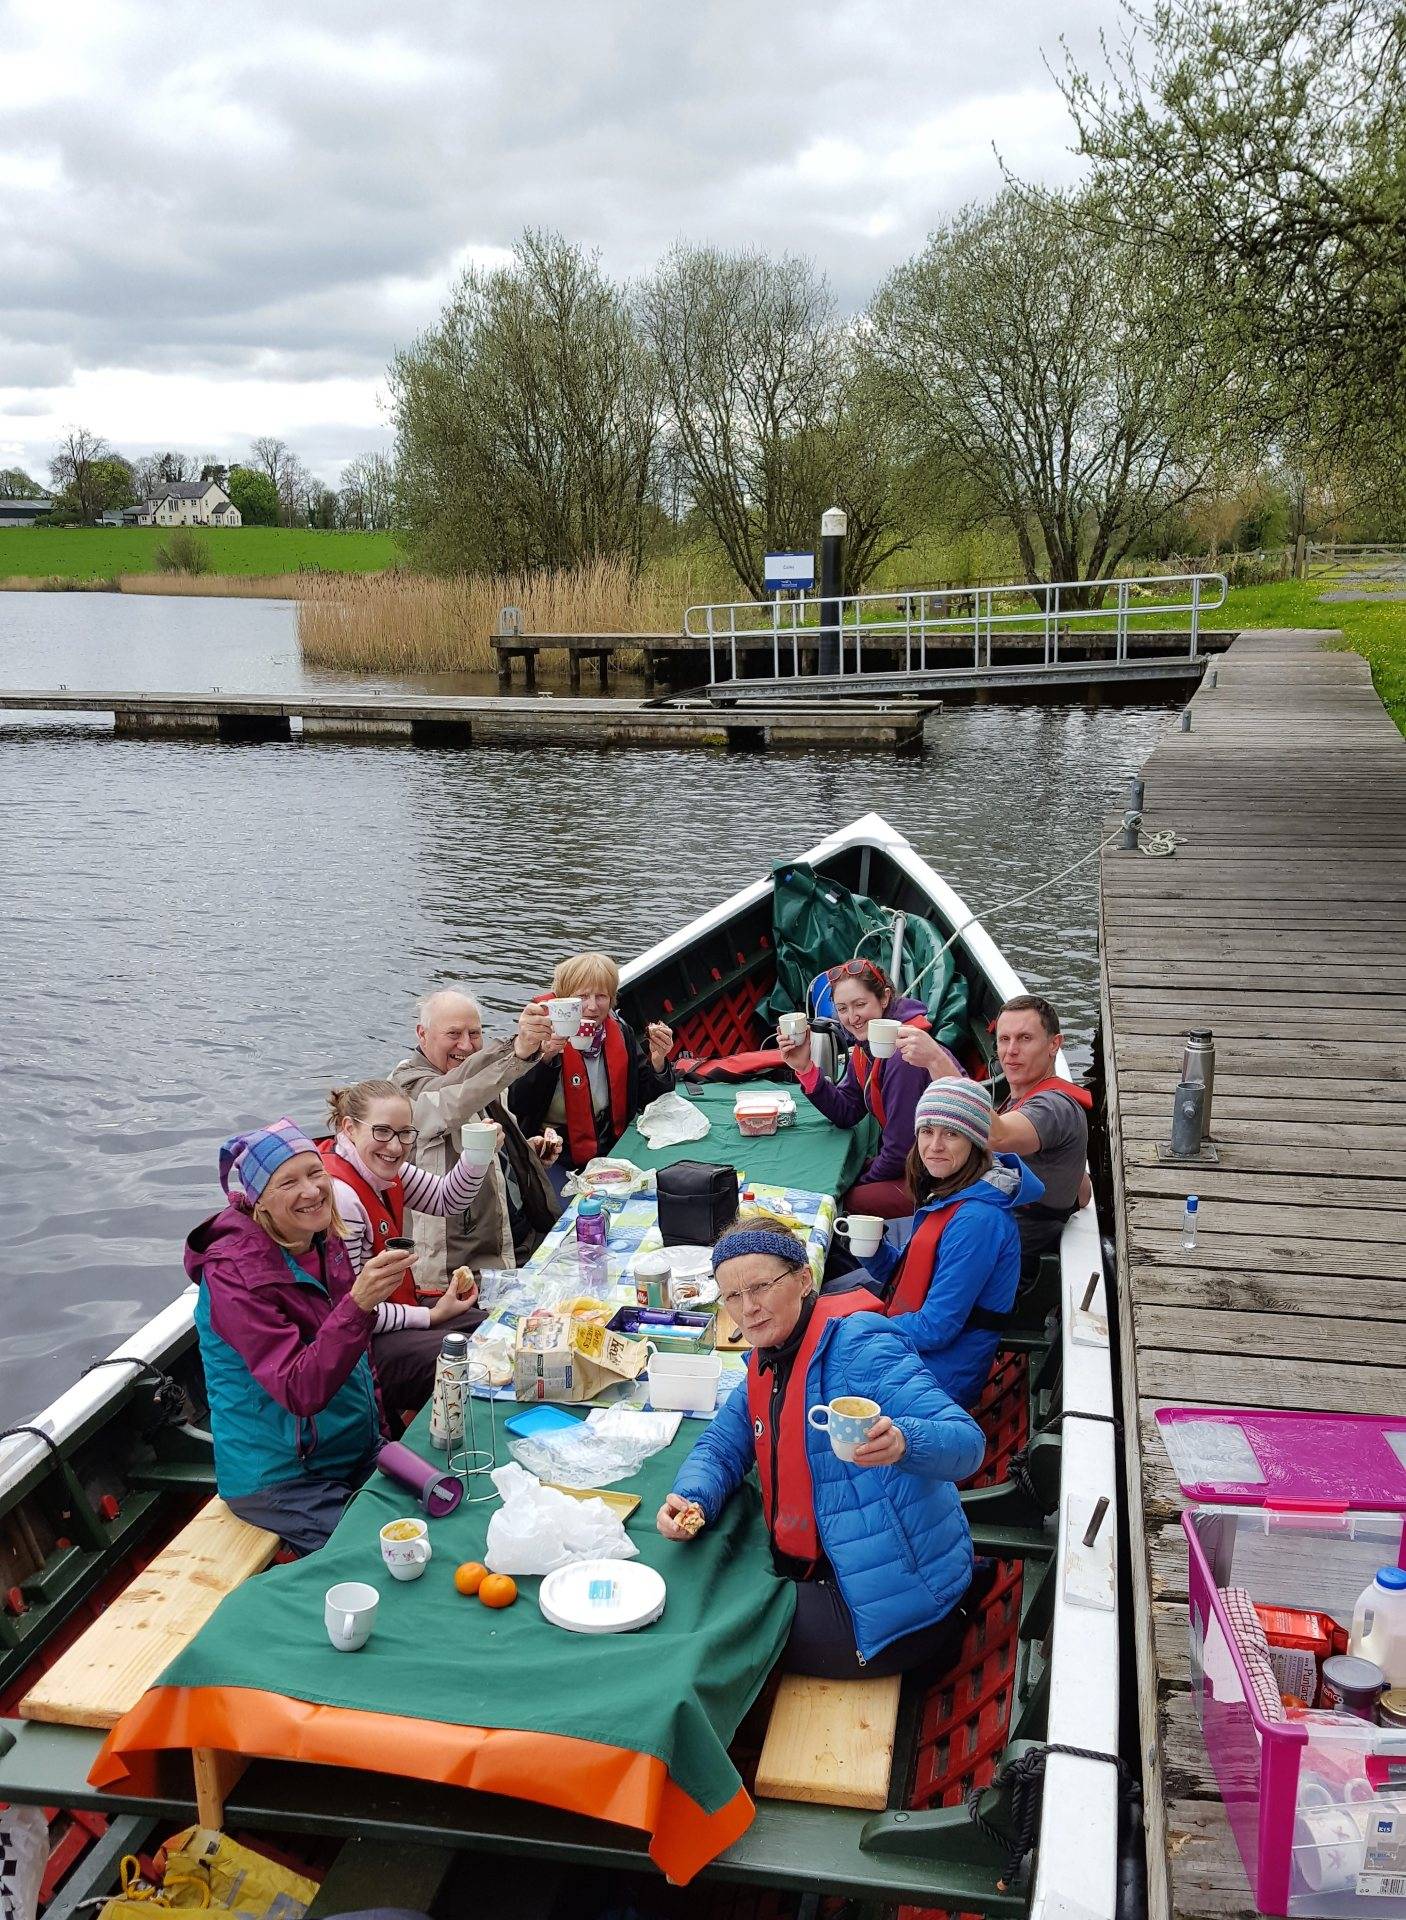 Group of people on a boat, sitting around a table sharing food and drinks. They are smiling at the camera and holding their mugs aloft.